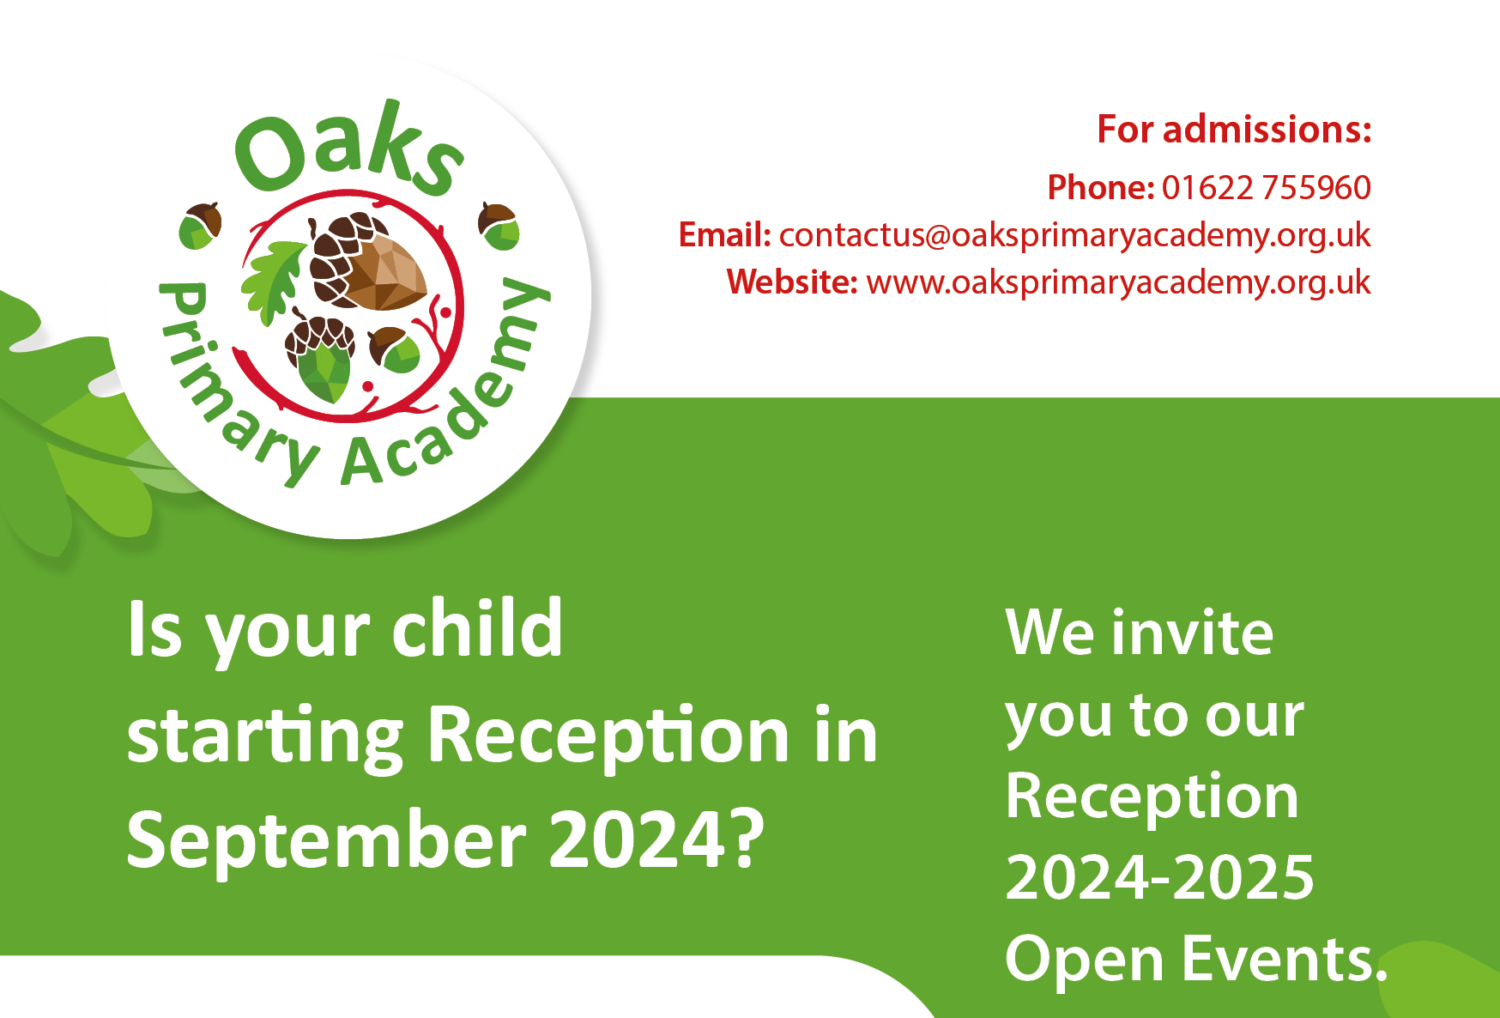 Is your child starting Reception in September 2024?